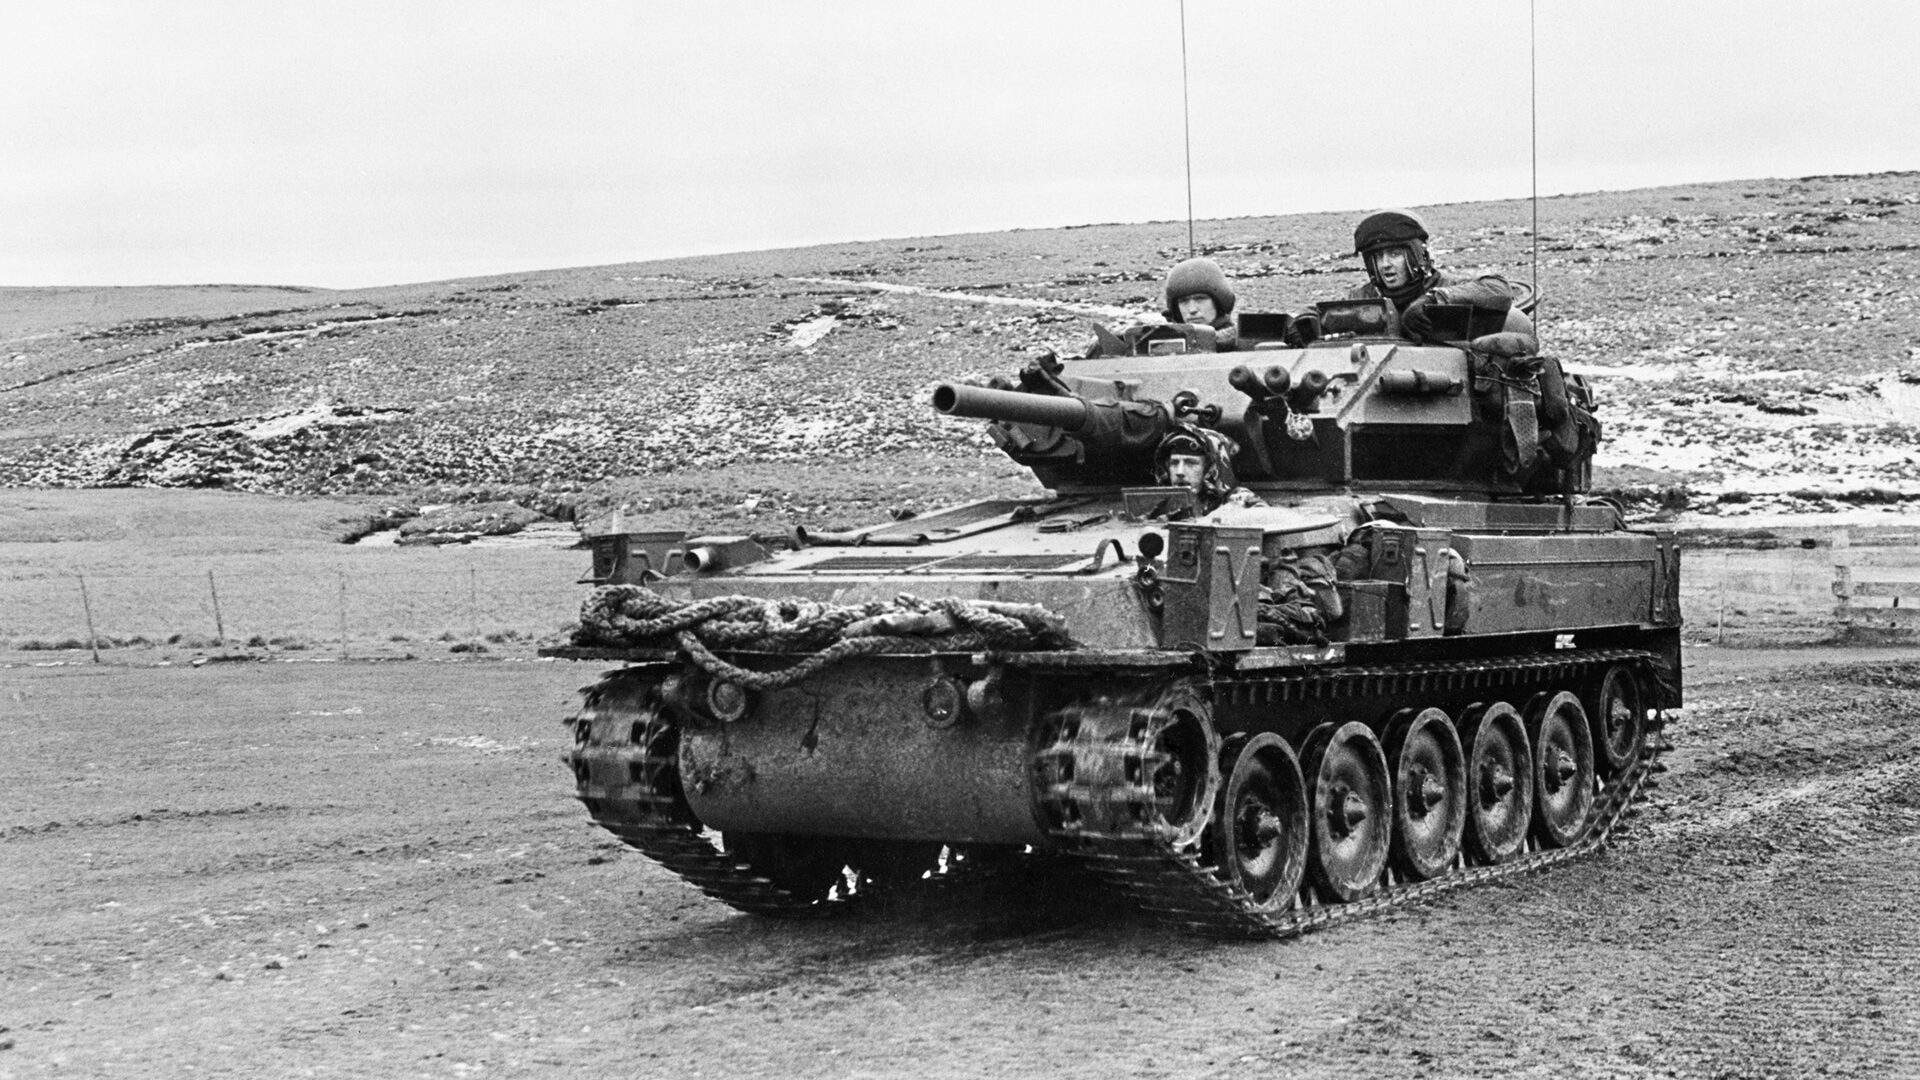 The Scorpion light tank was one of the few military vehicles the British had that was capable of operating in the rough terrain of the Falkland Islands. The tanks not only furnished much-needed firepower but also diverted attention from British infantry attempting to infiltrate Argentine lines.